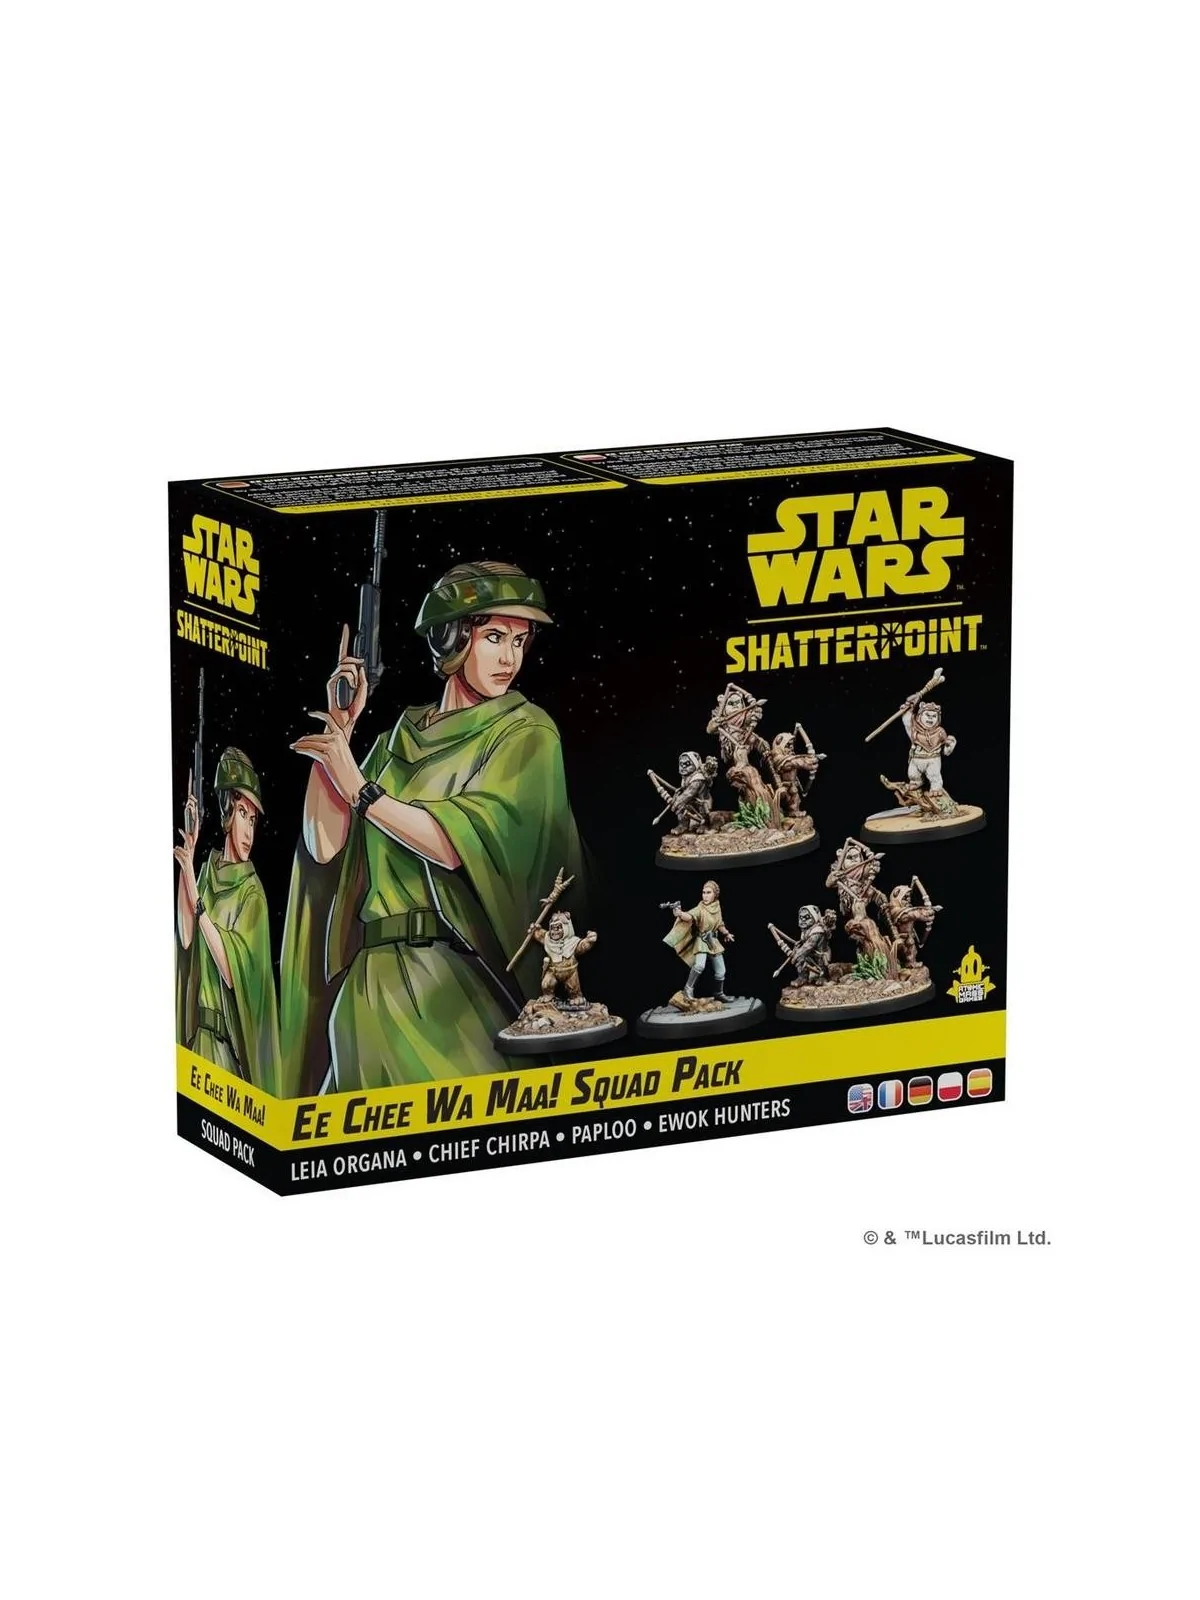 Comprar Star Wars Shatterpoint: Ee Chee Wa Maa! Squad Pack barato al m